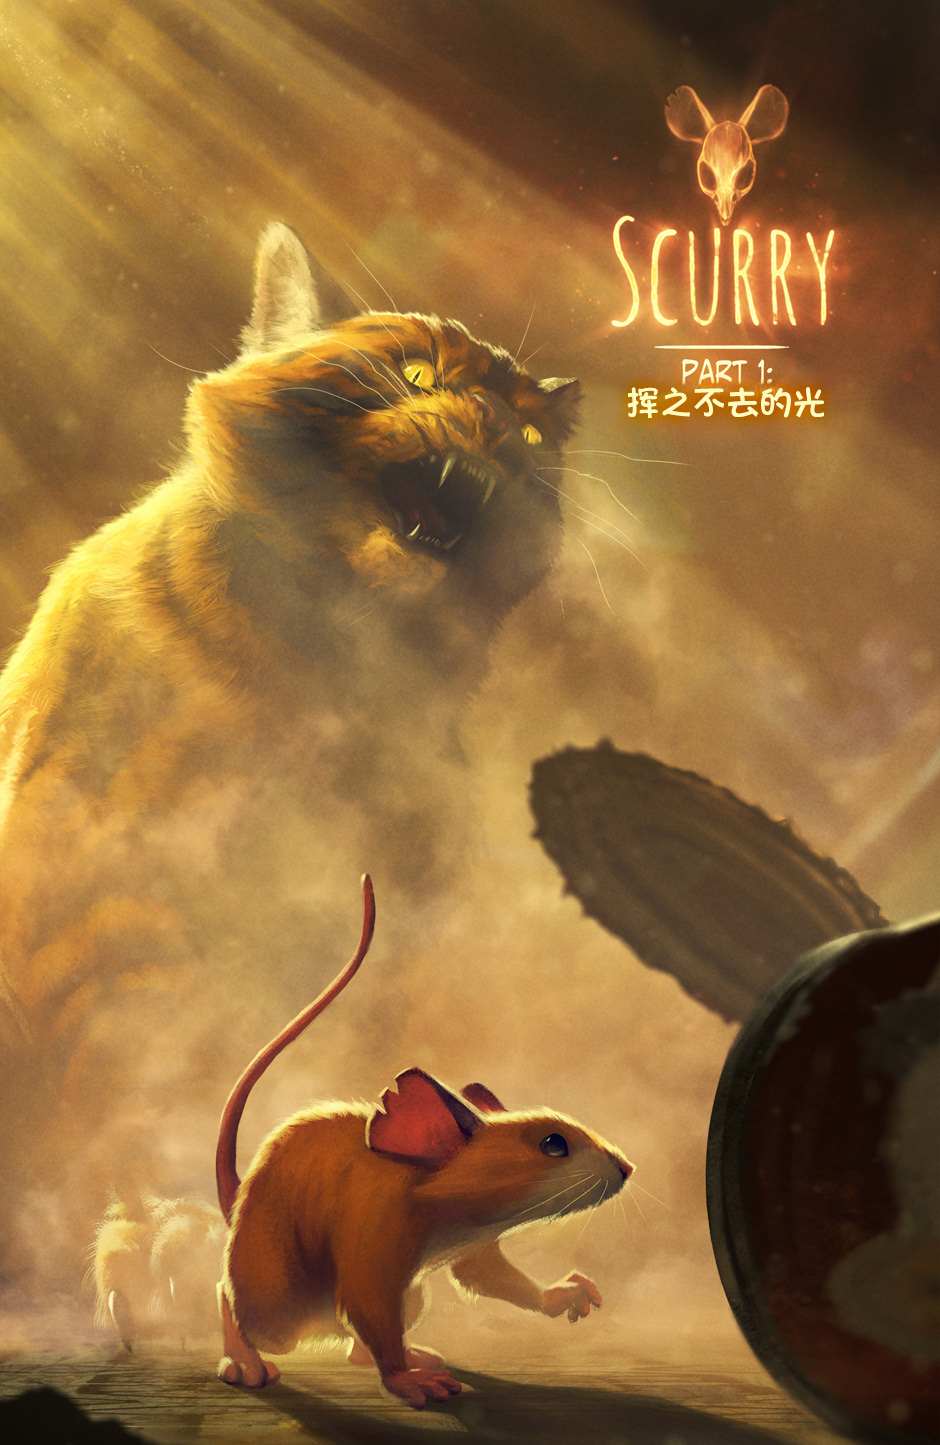 Scurry - 第1卷 - 1